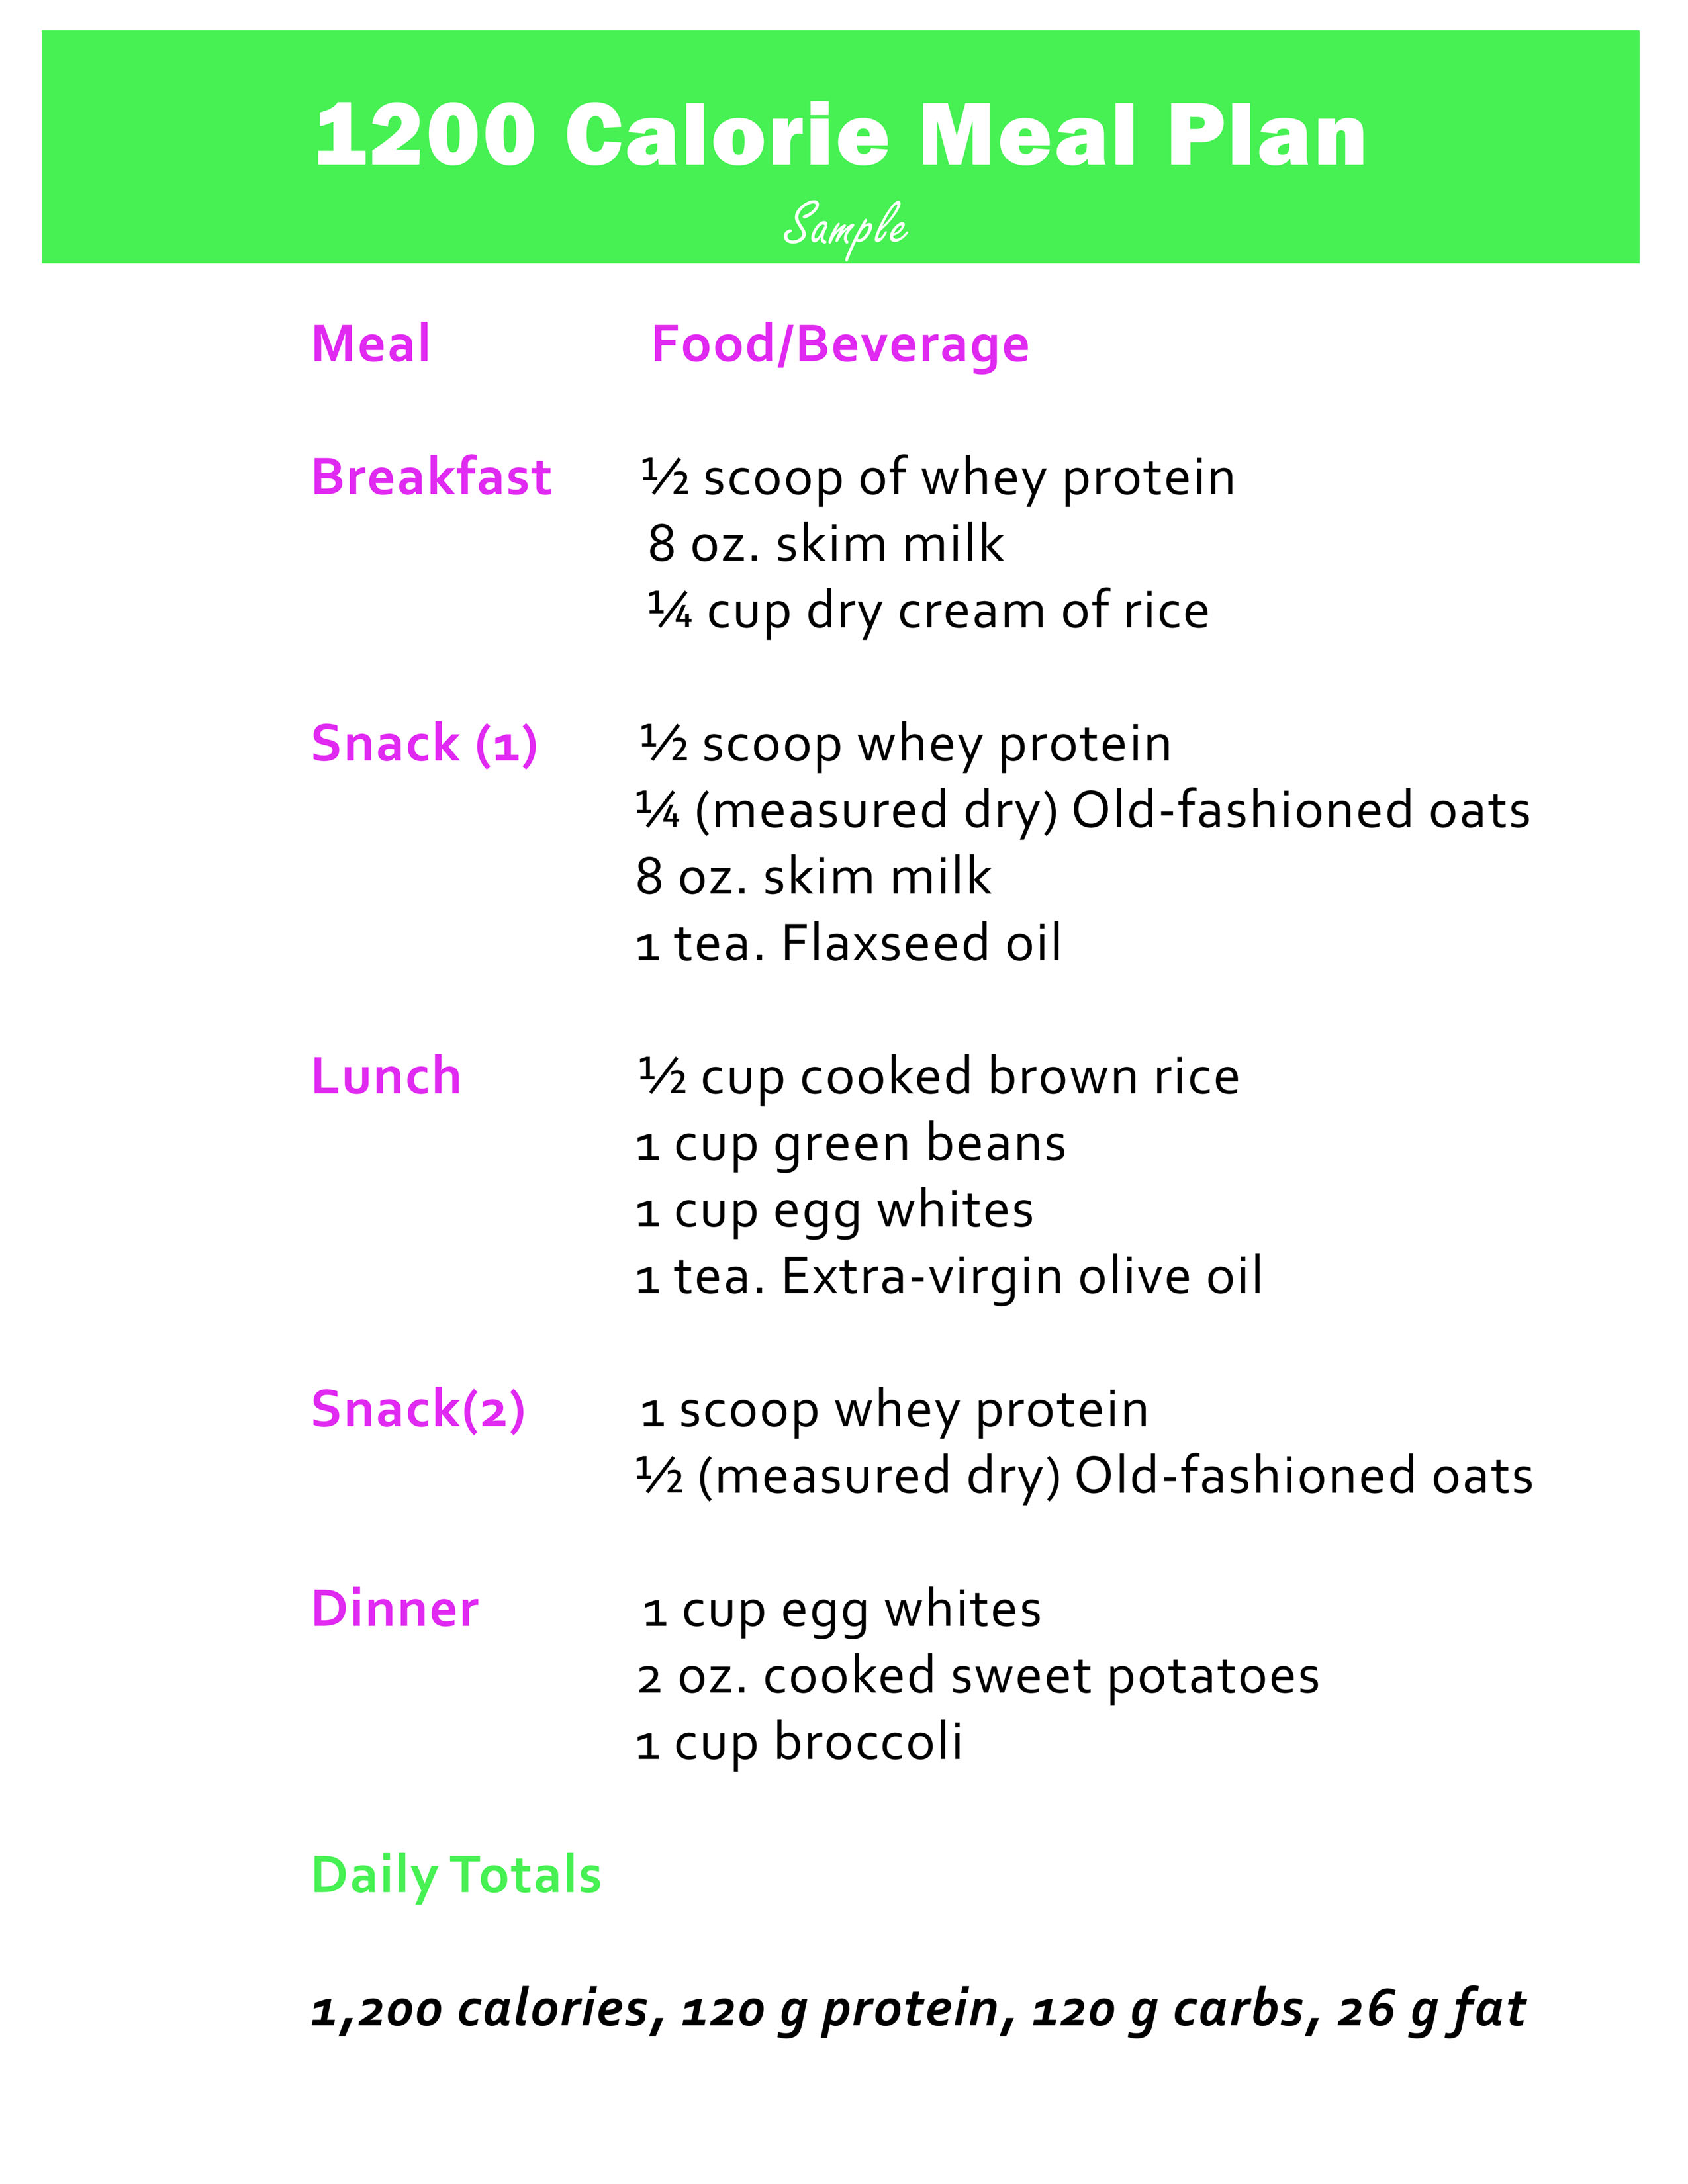 1200 calorie meal plan you can download and print.